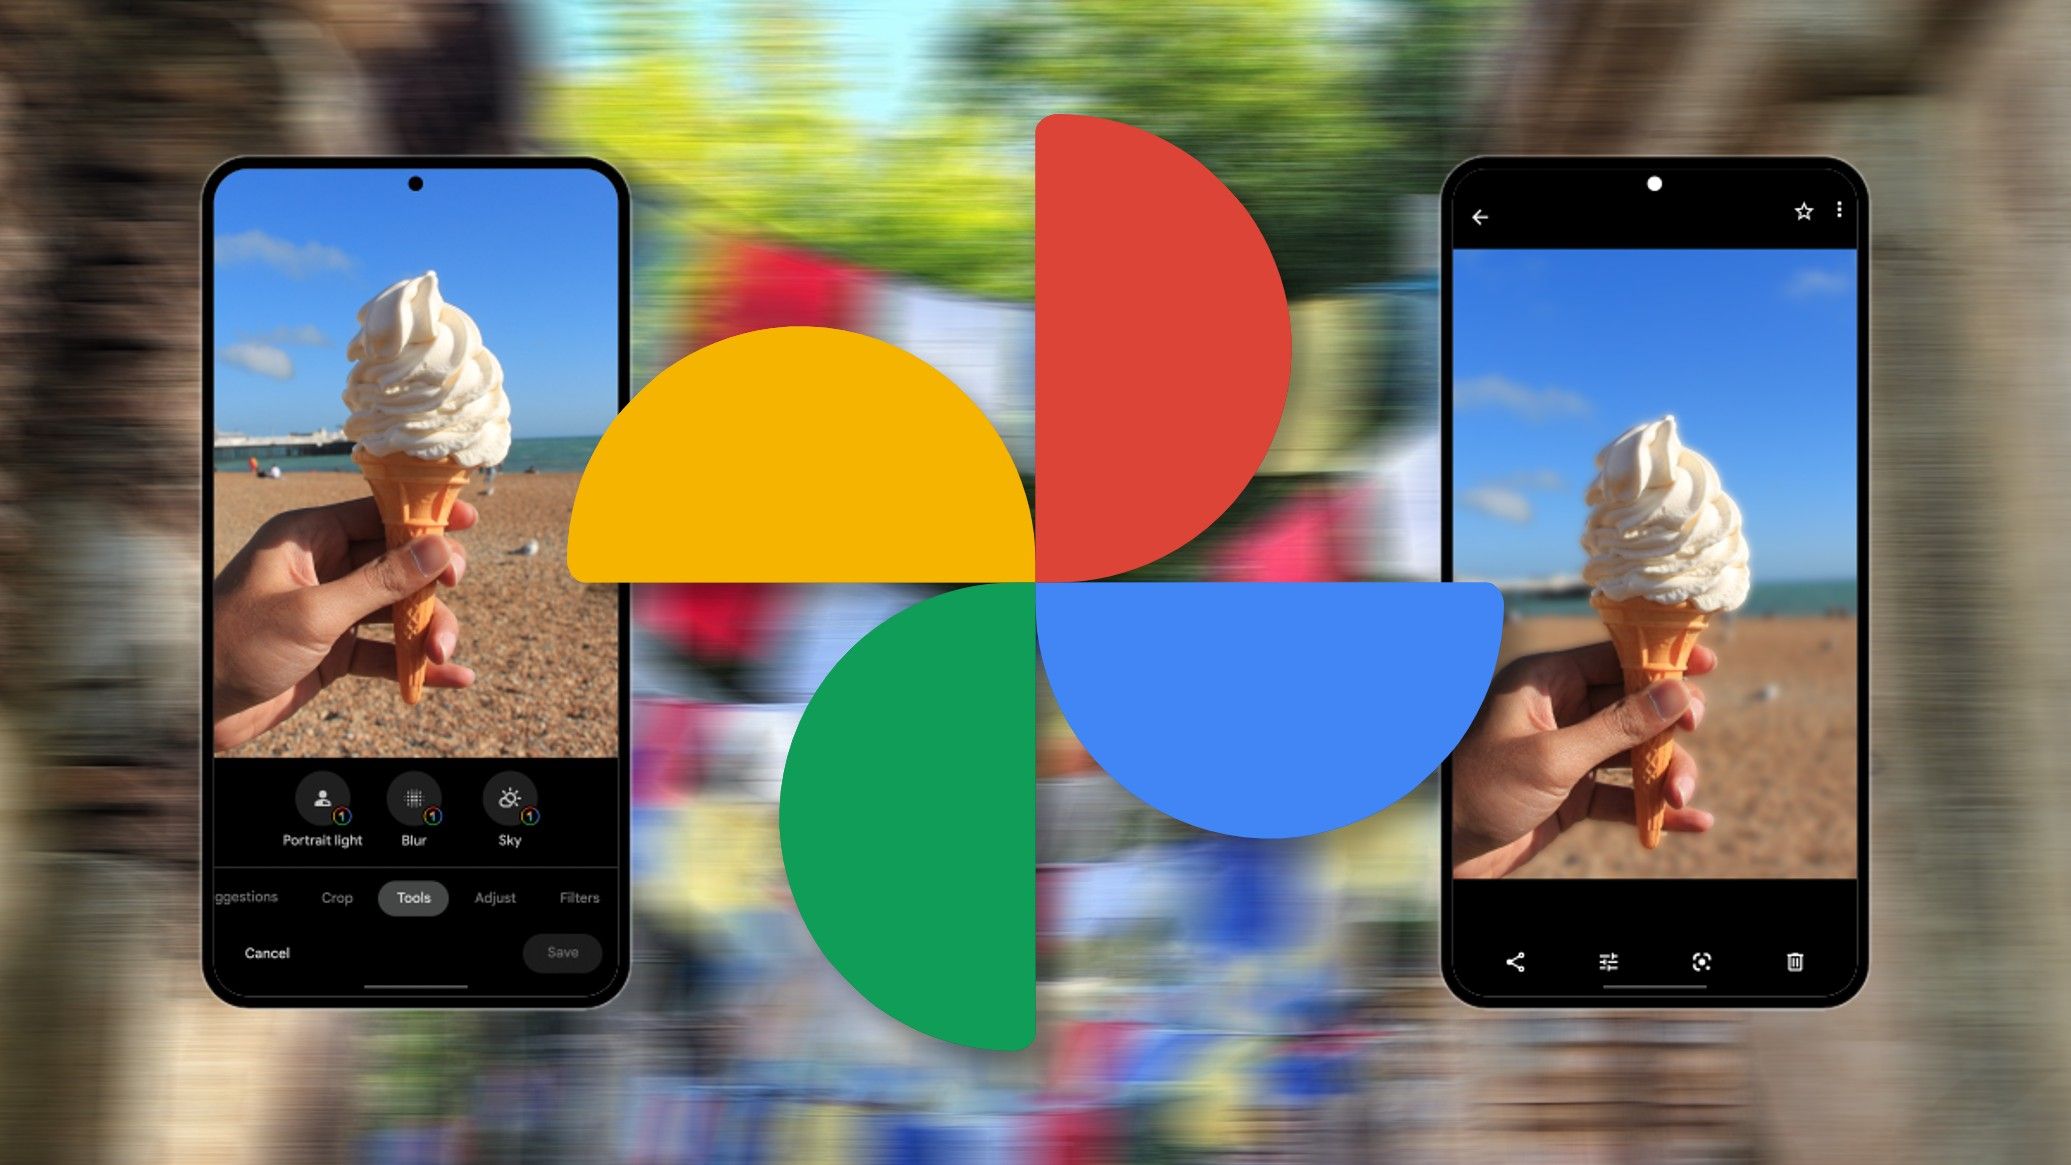 Google Photos brings Portrait Mode to your dogs, food, and much more